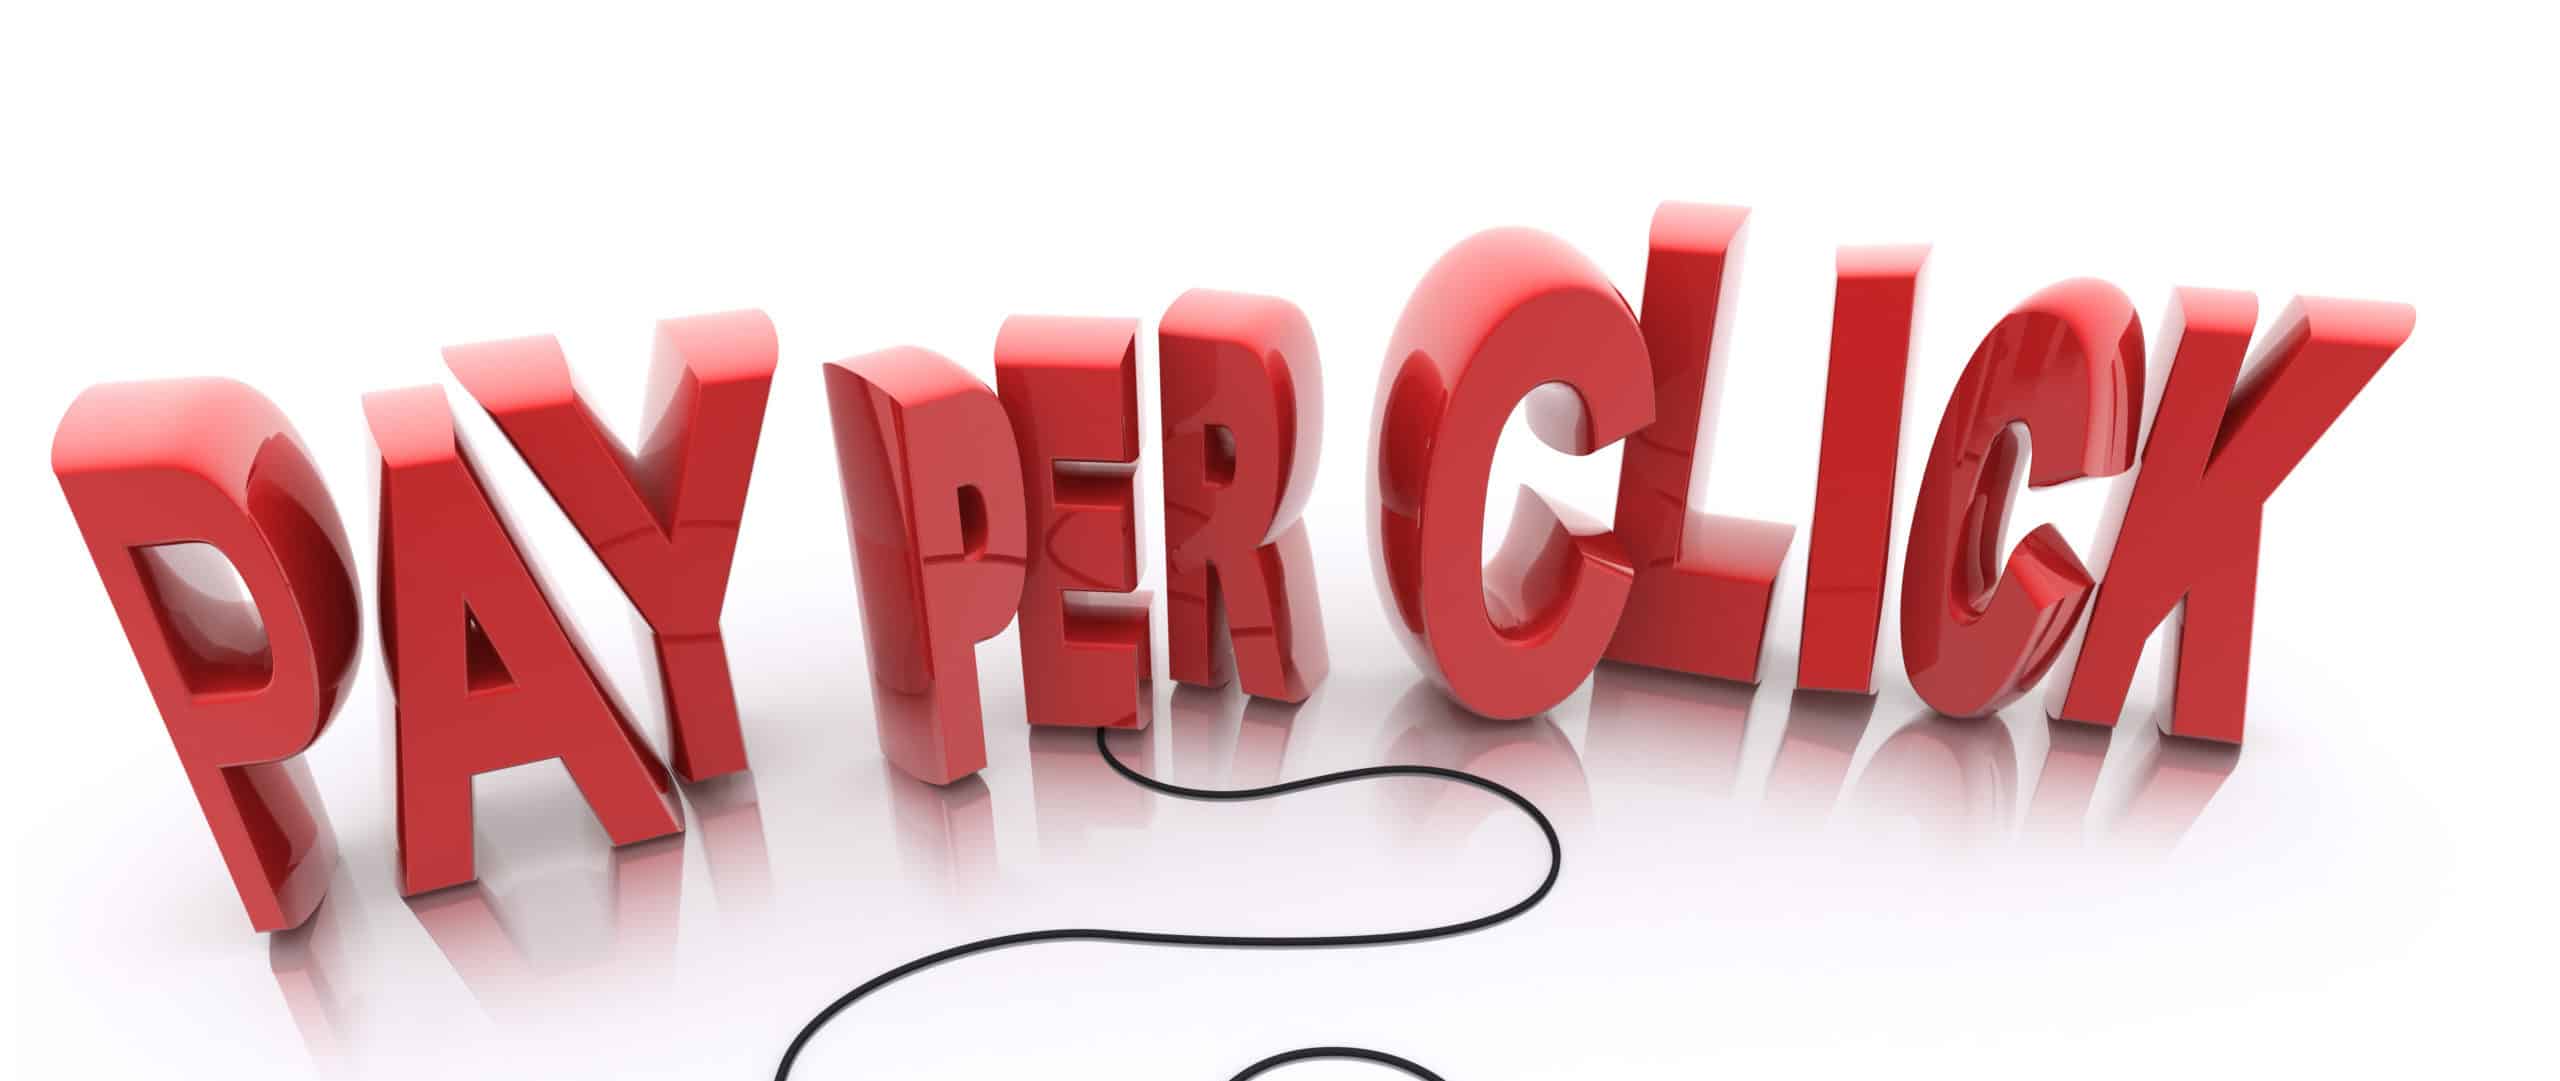 Are You Missing Out on Potential Clients? Pay-Per-Click Can Help!